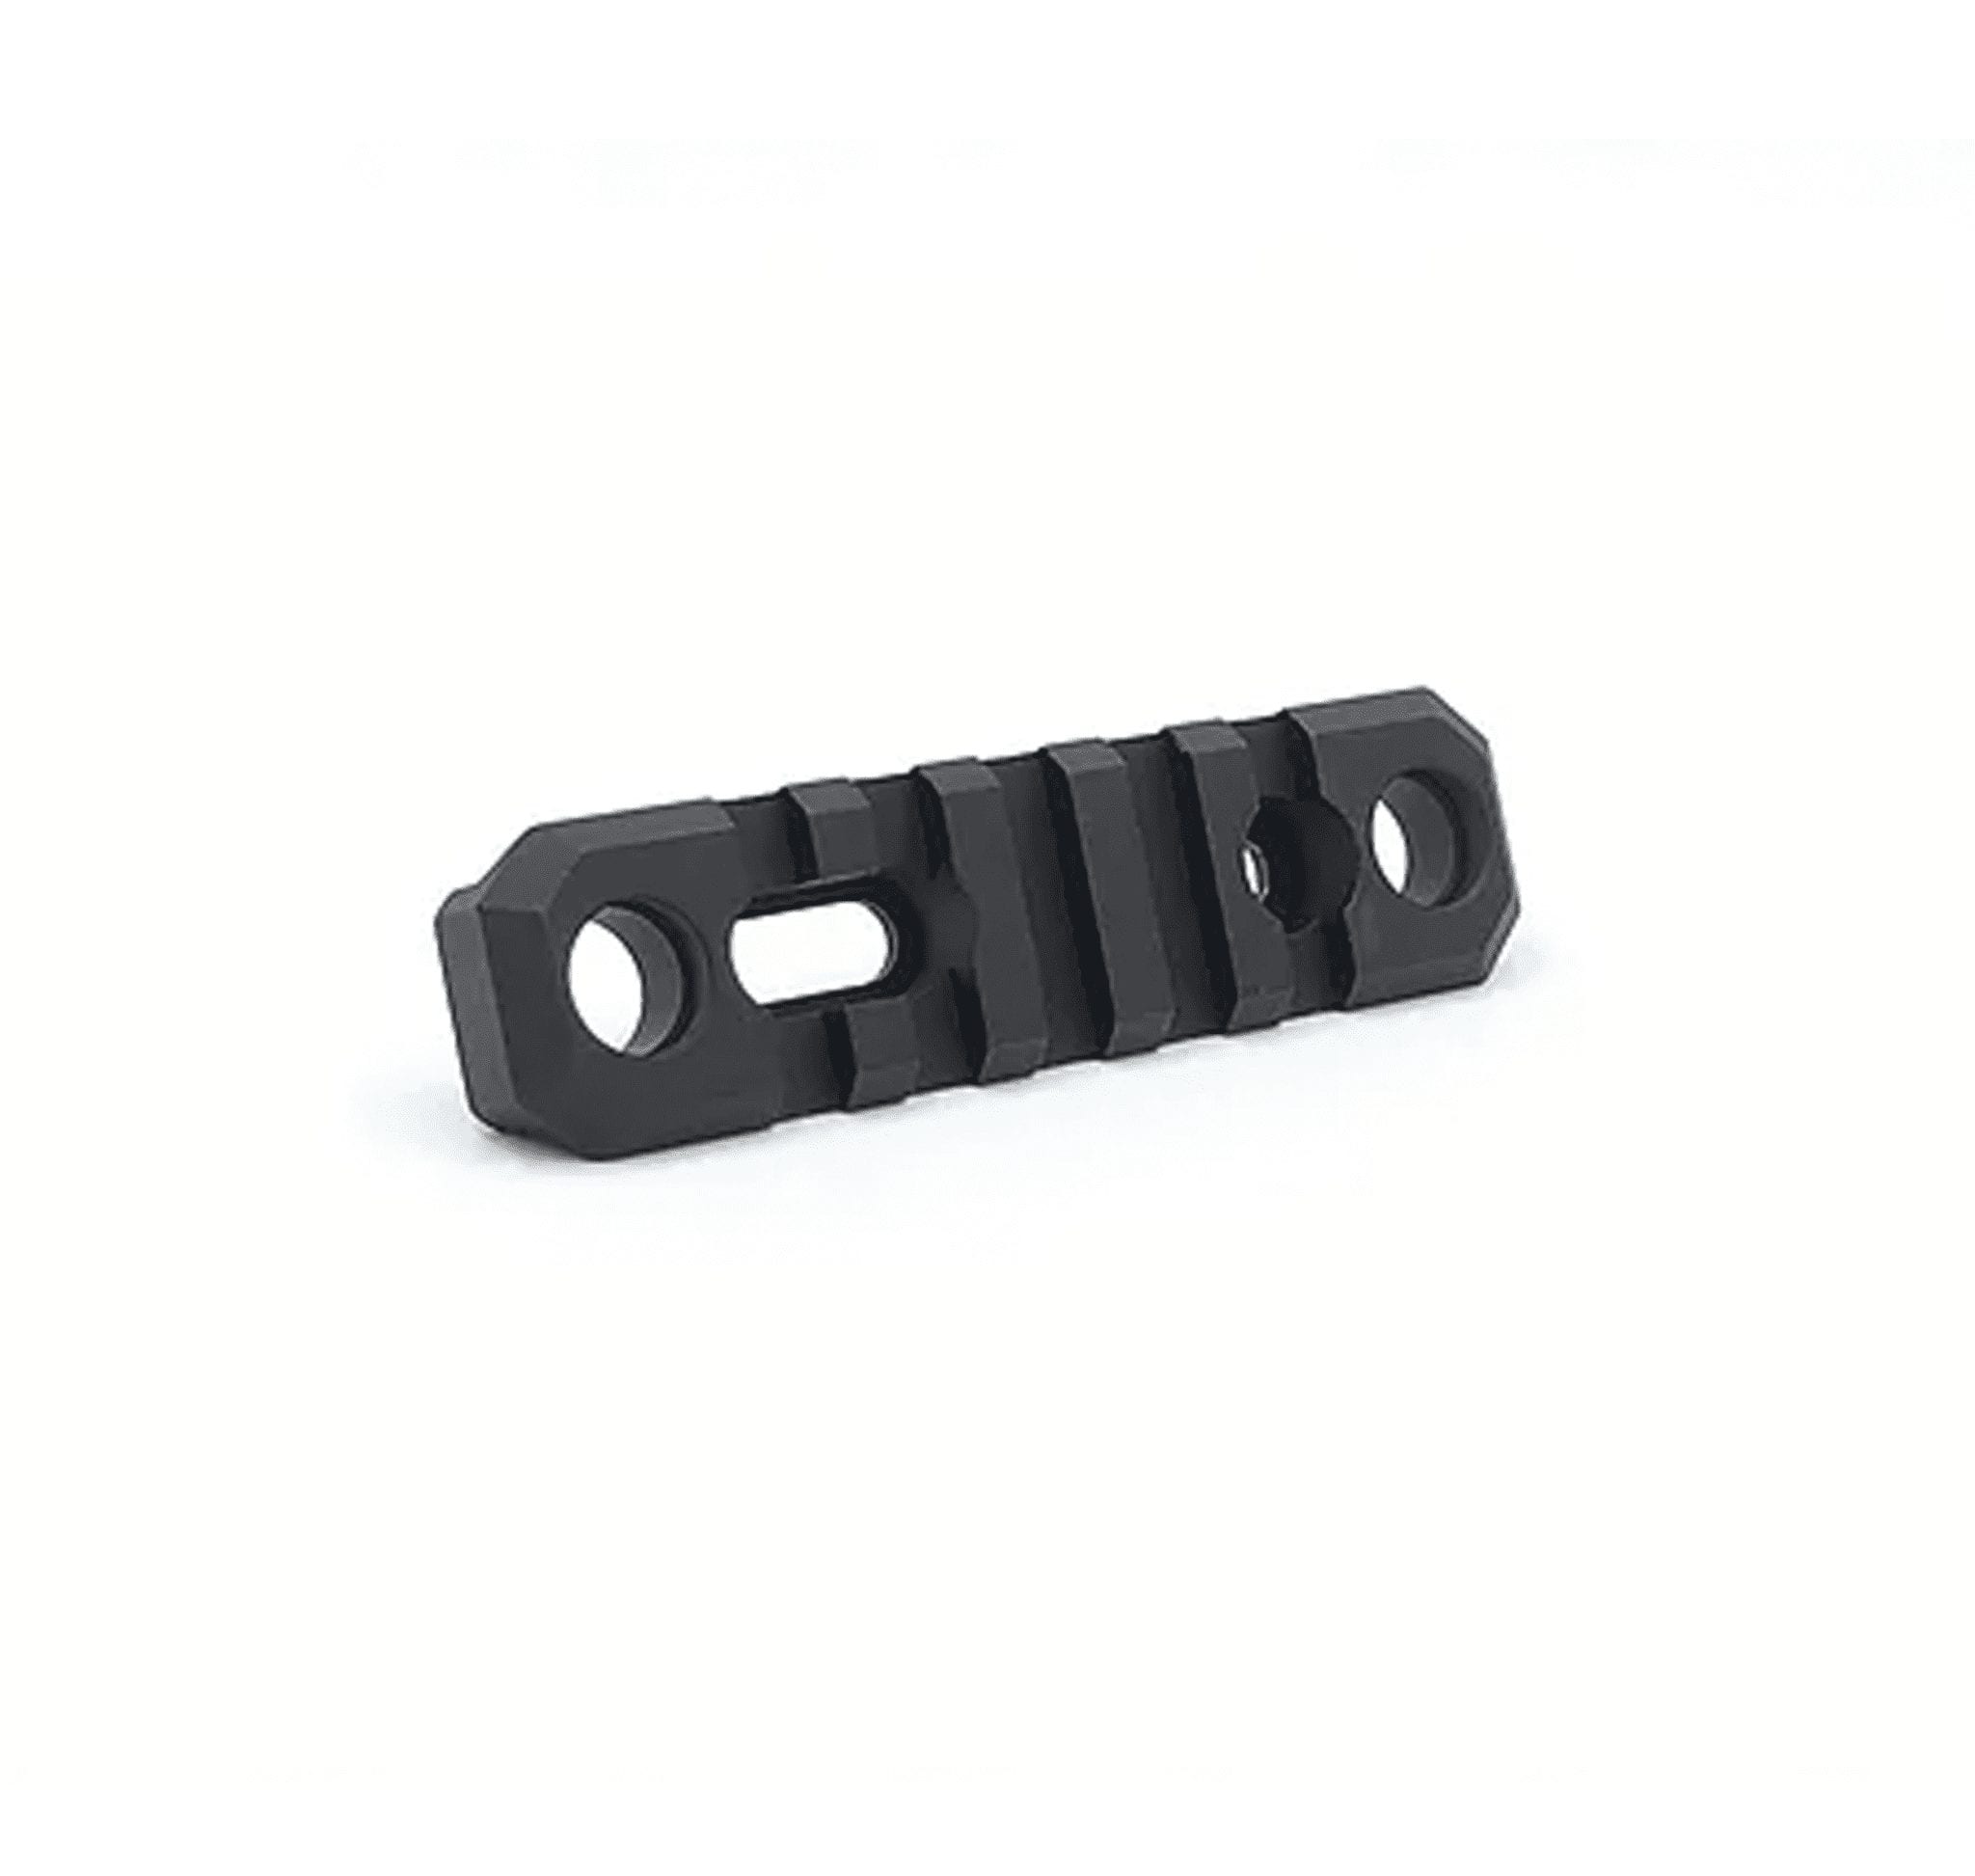 3.1 ” 5 Slot Picatinny Adapter for Foundation SS Rail